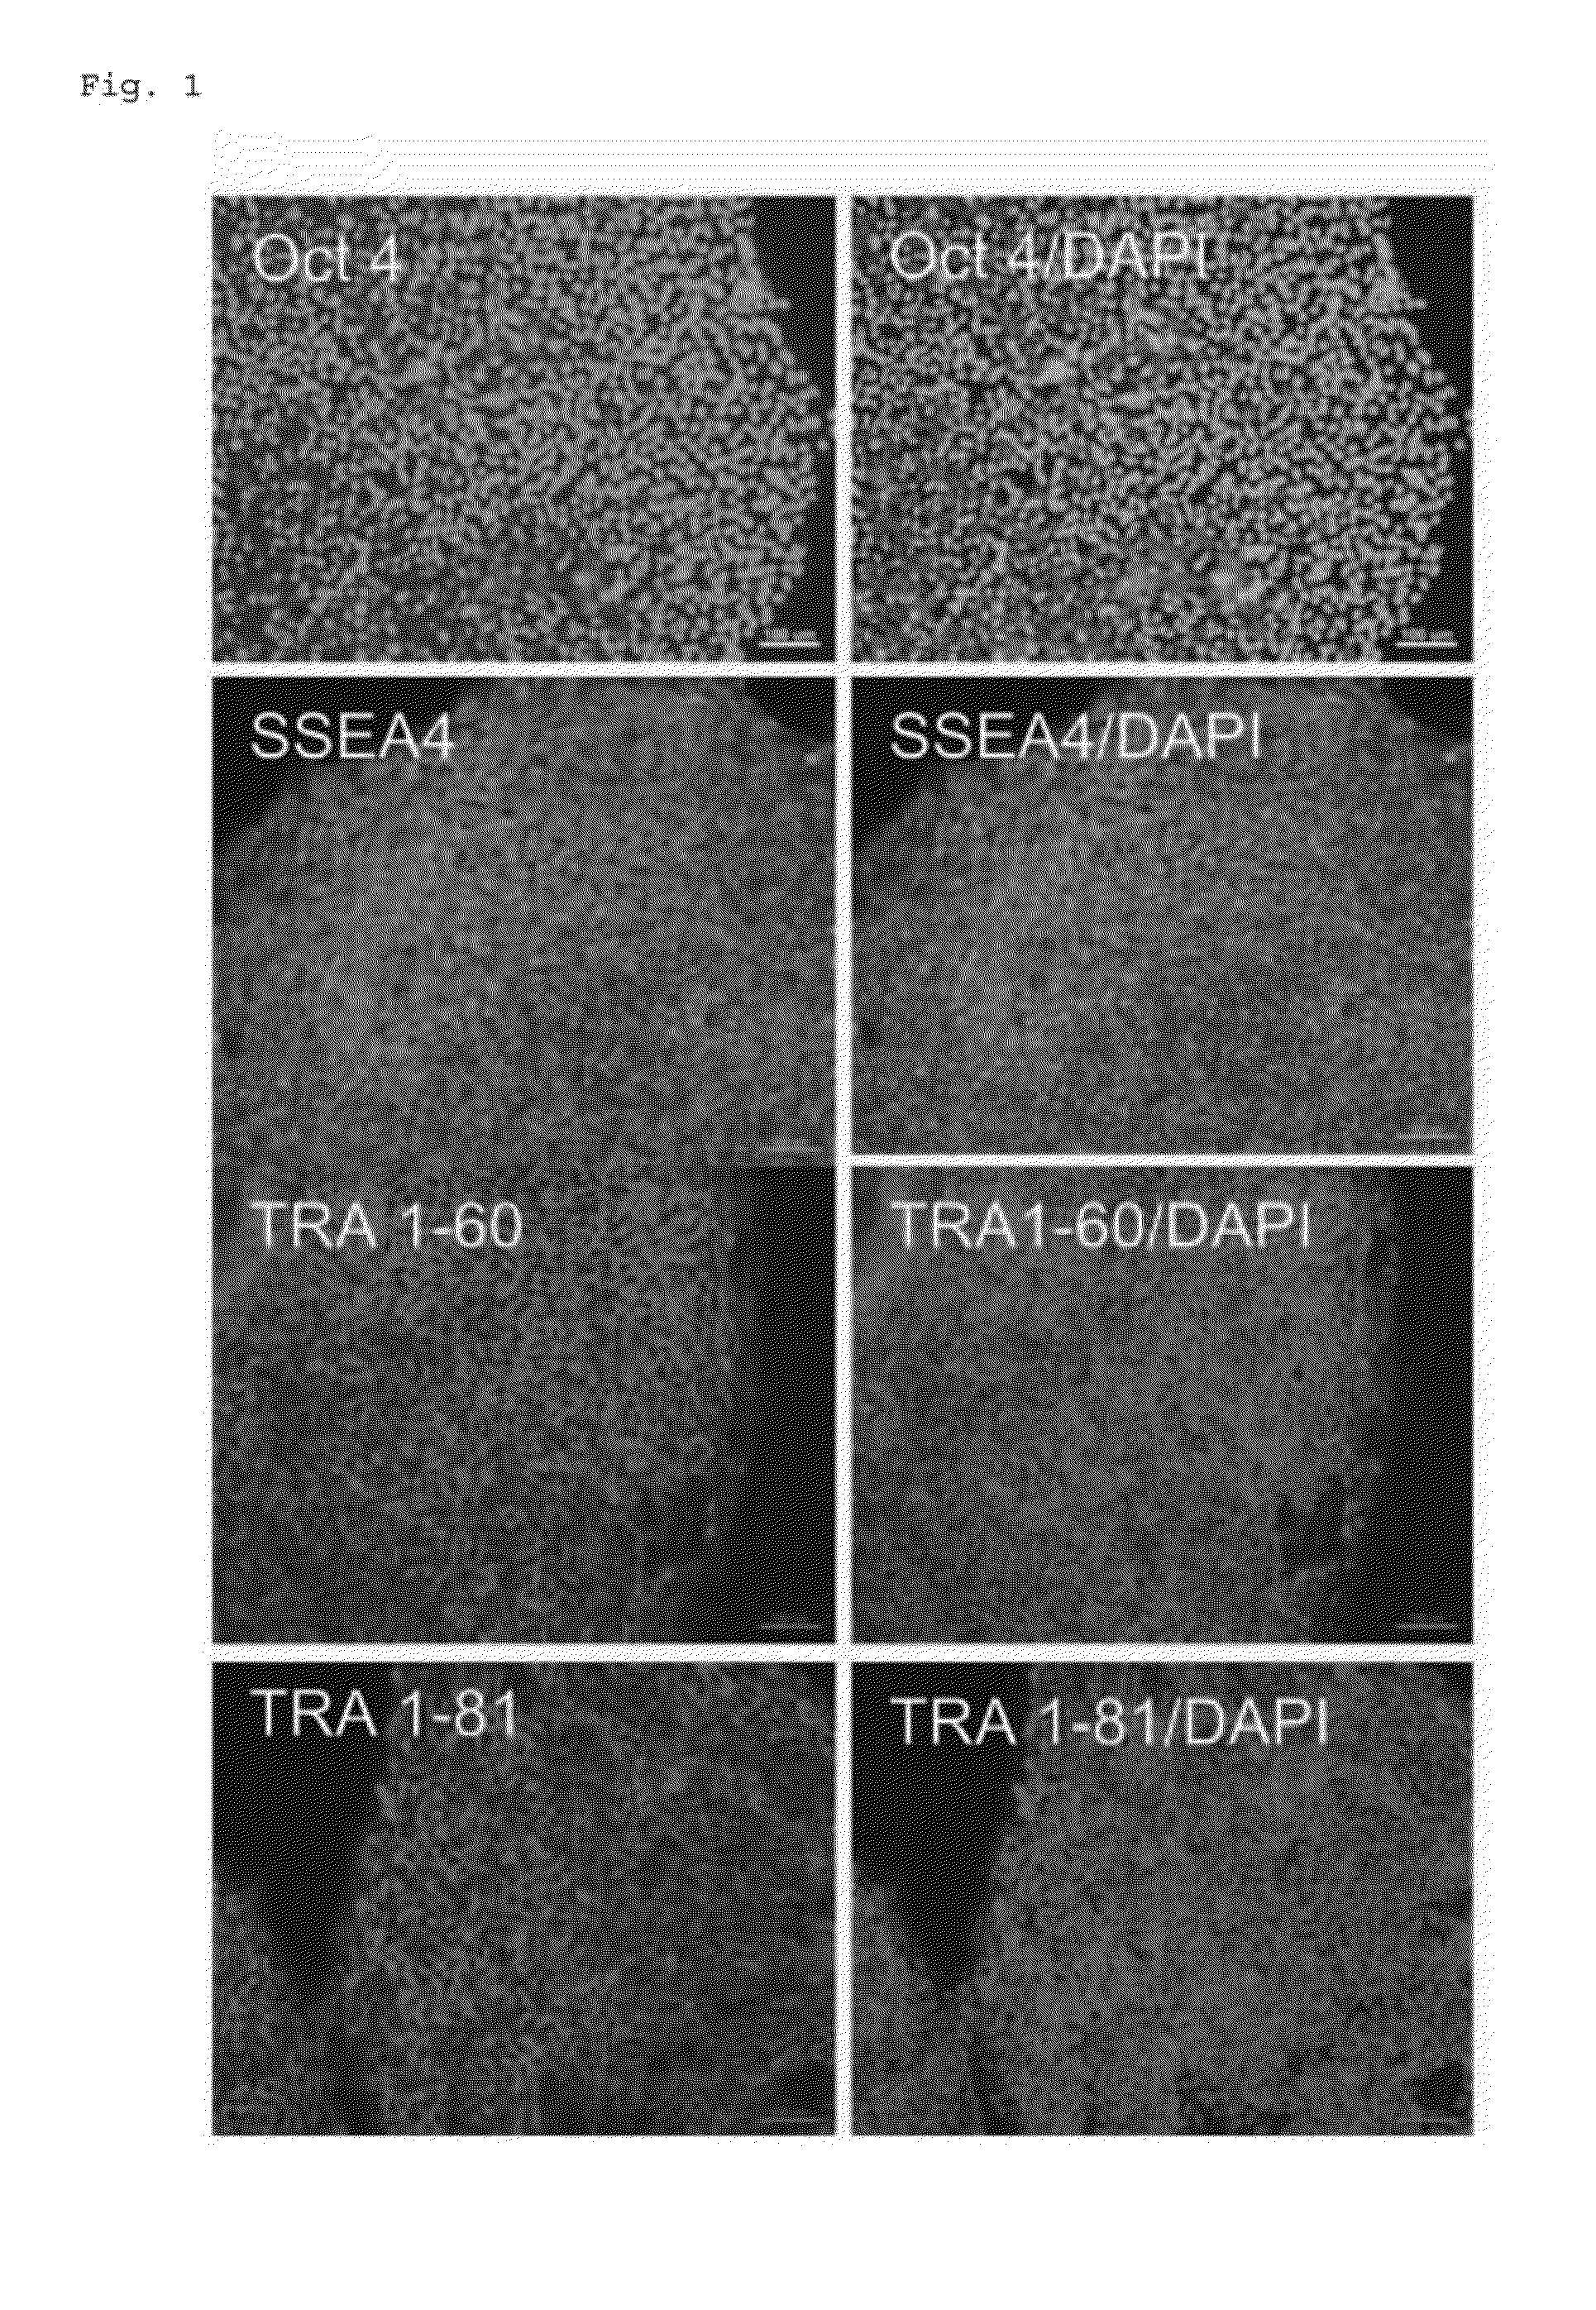 Mature hepatocyte cells derived from induced pluripotent stem cells, a generating method thereof, and use thereof for treatment of liver diseases